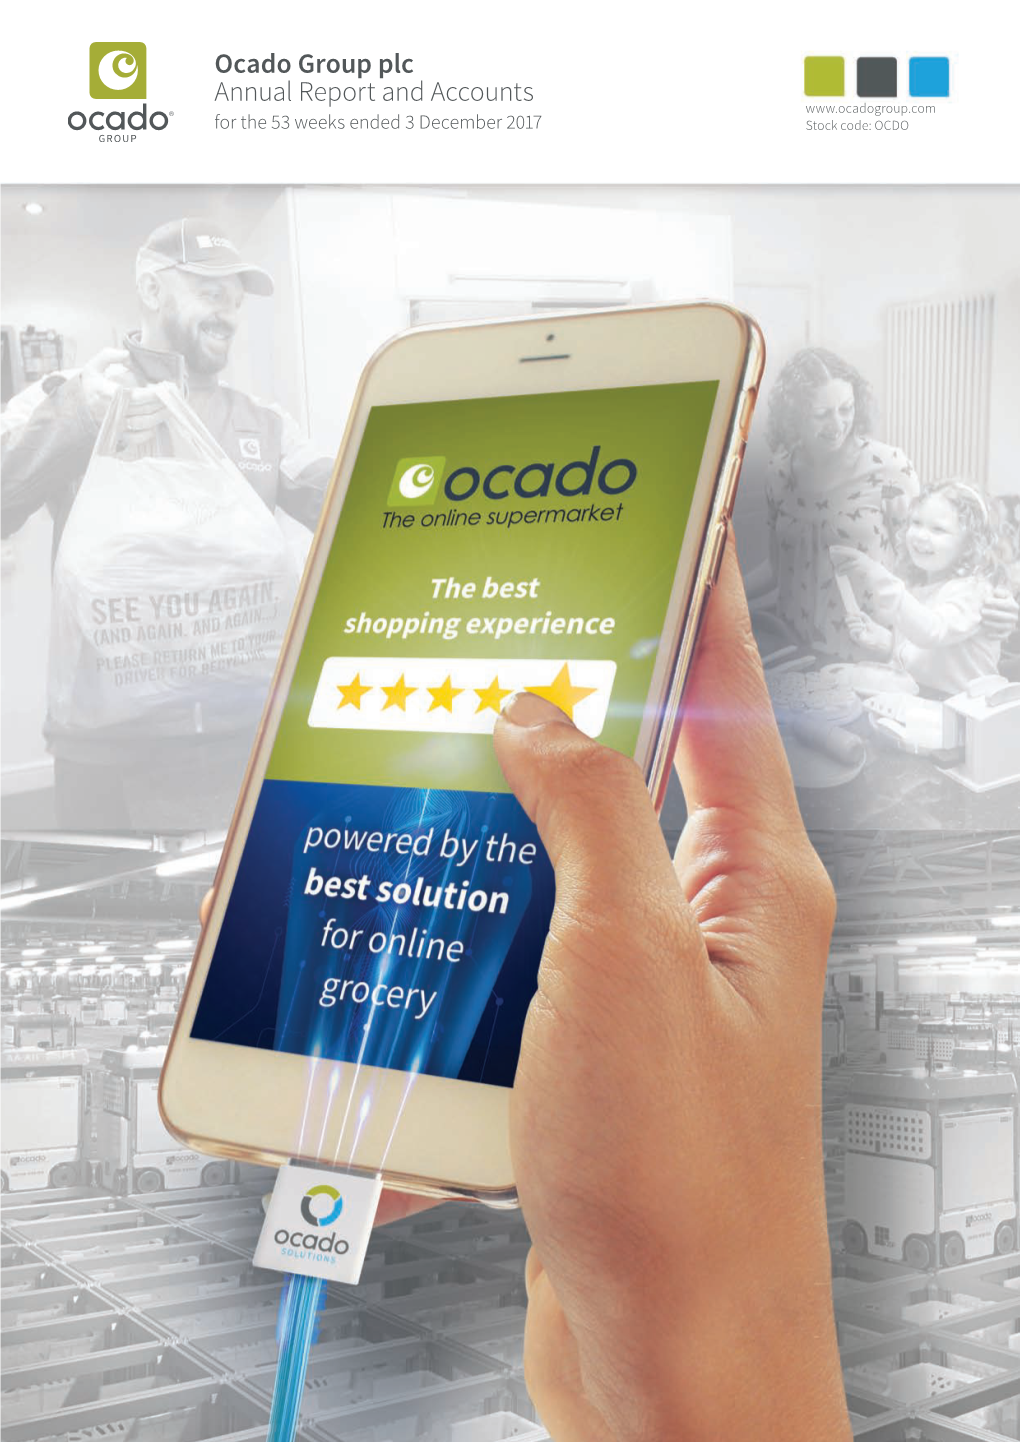 Ocado Group Plc Annual Report and Accounts